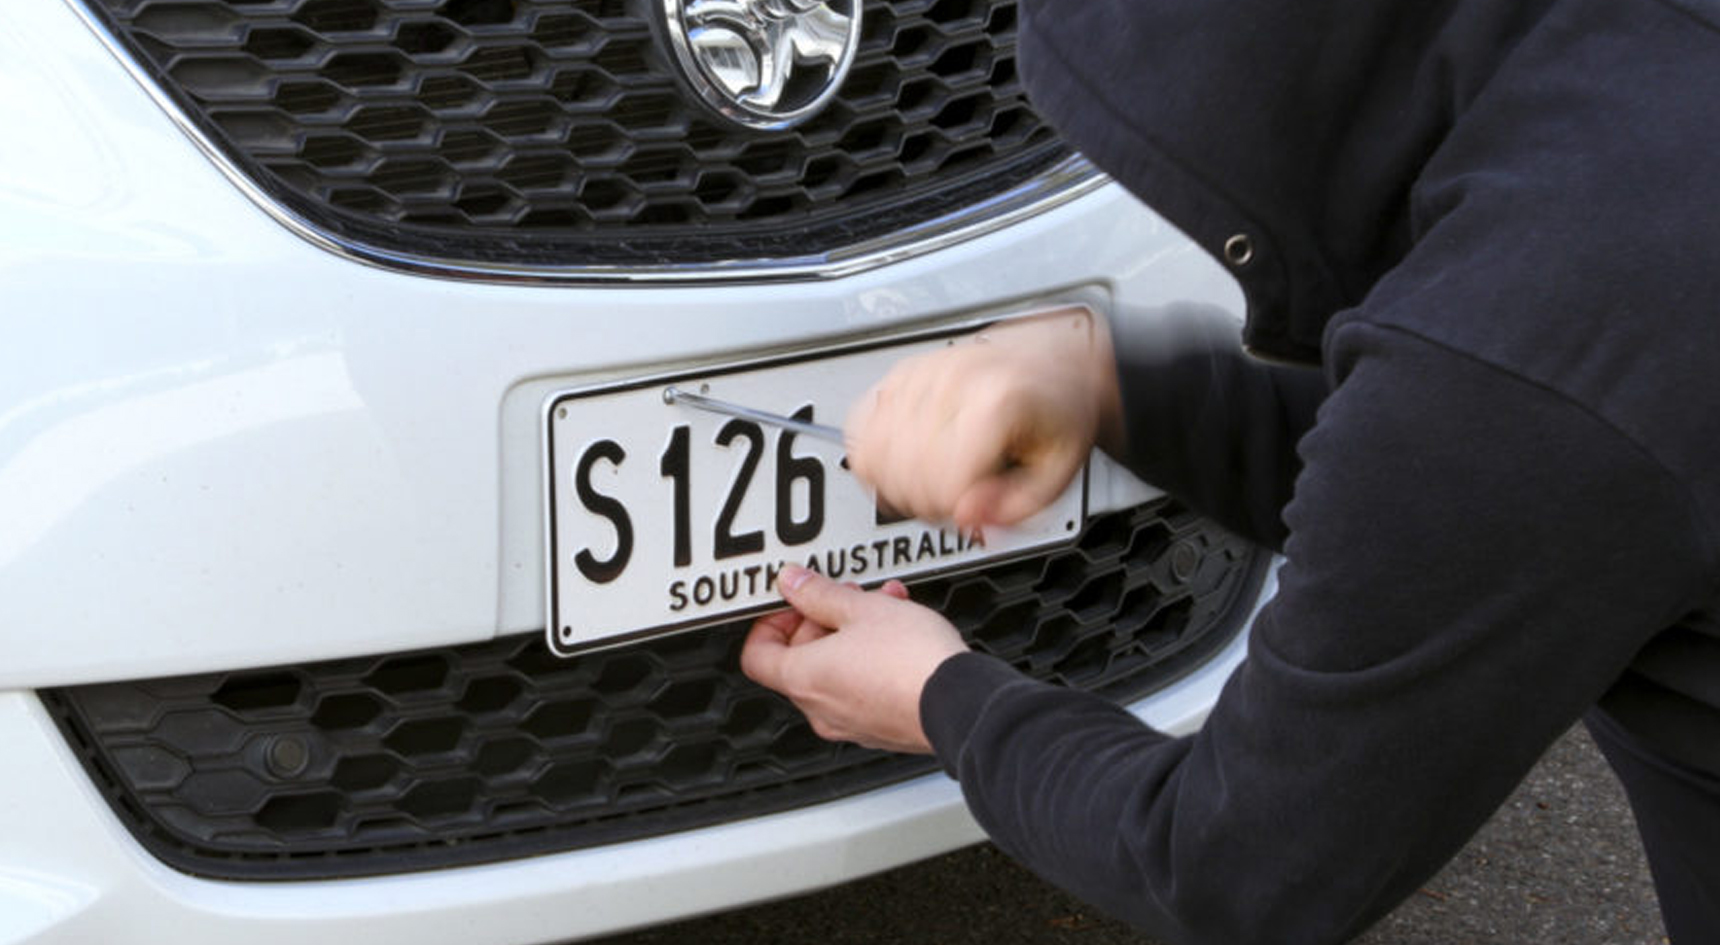 Stealing Number Plate